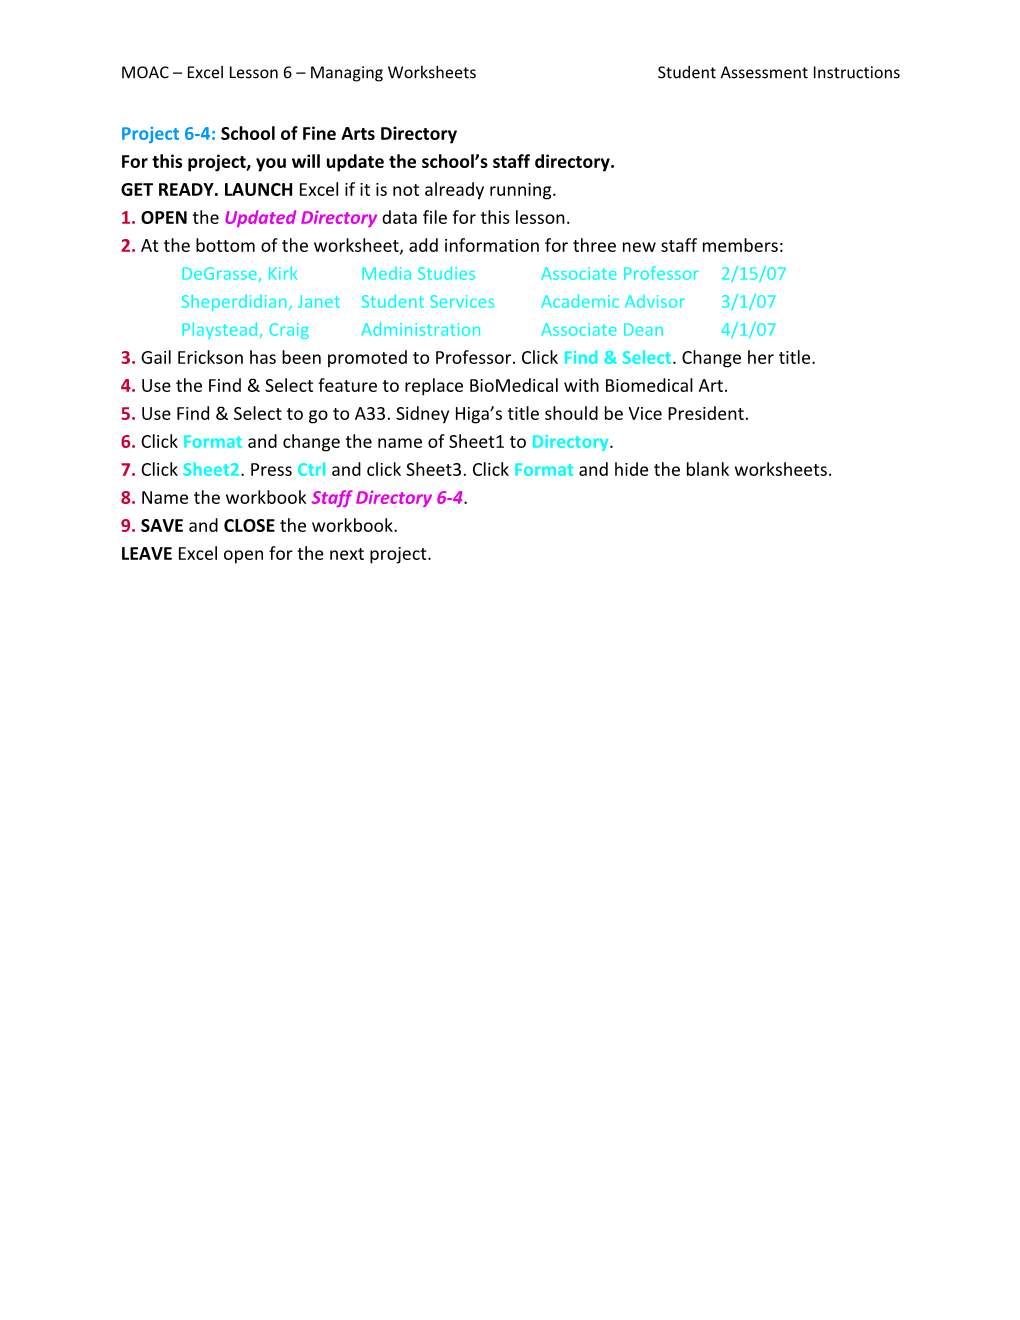 MOAC Excel Lesson 6 Managing Worksheets Student Assessment Instructions